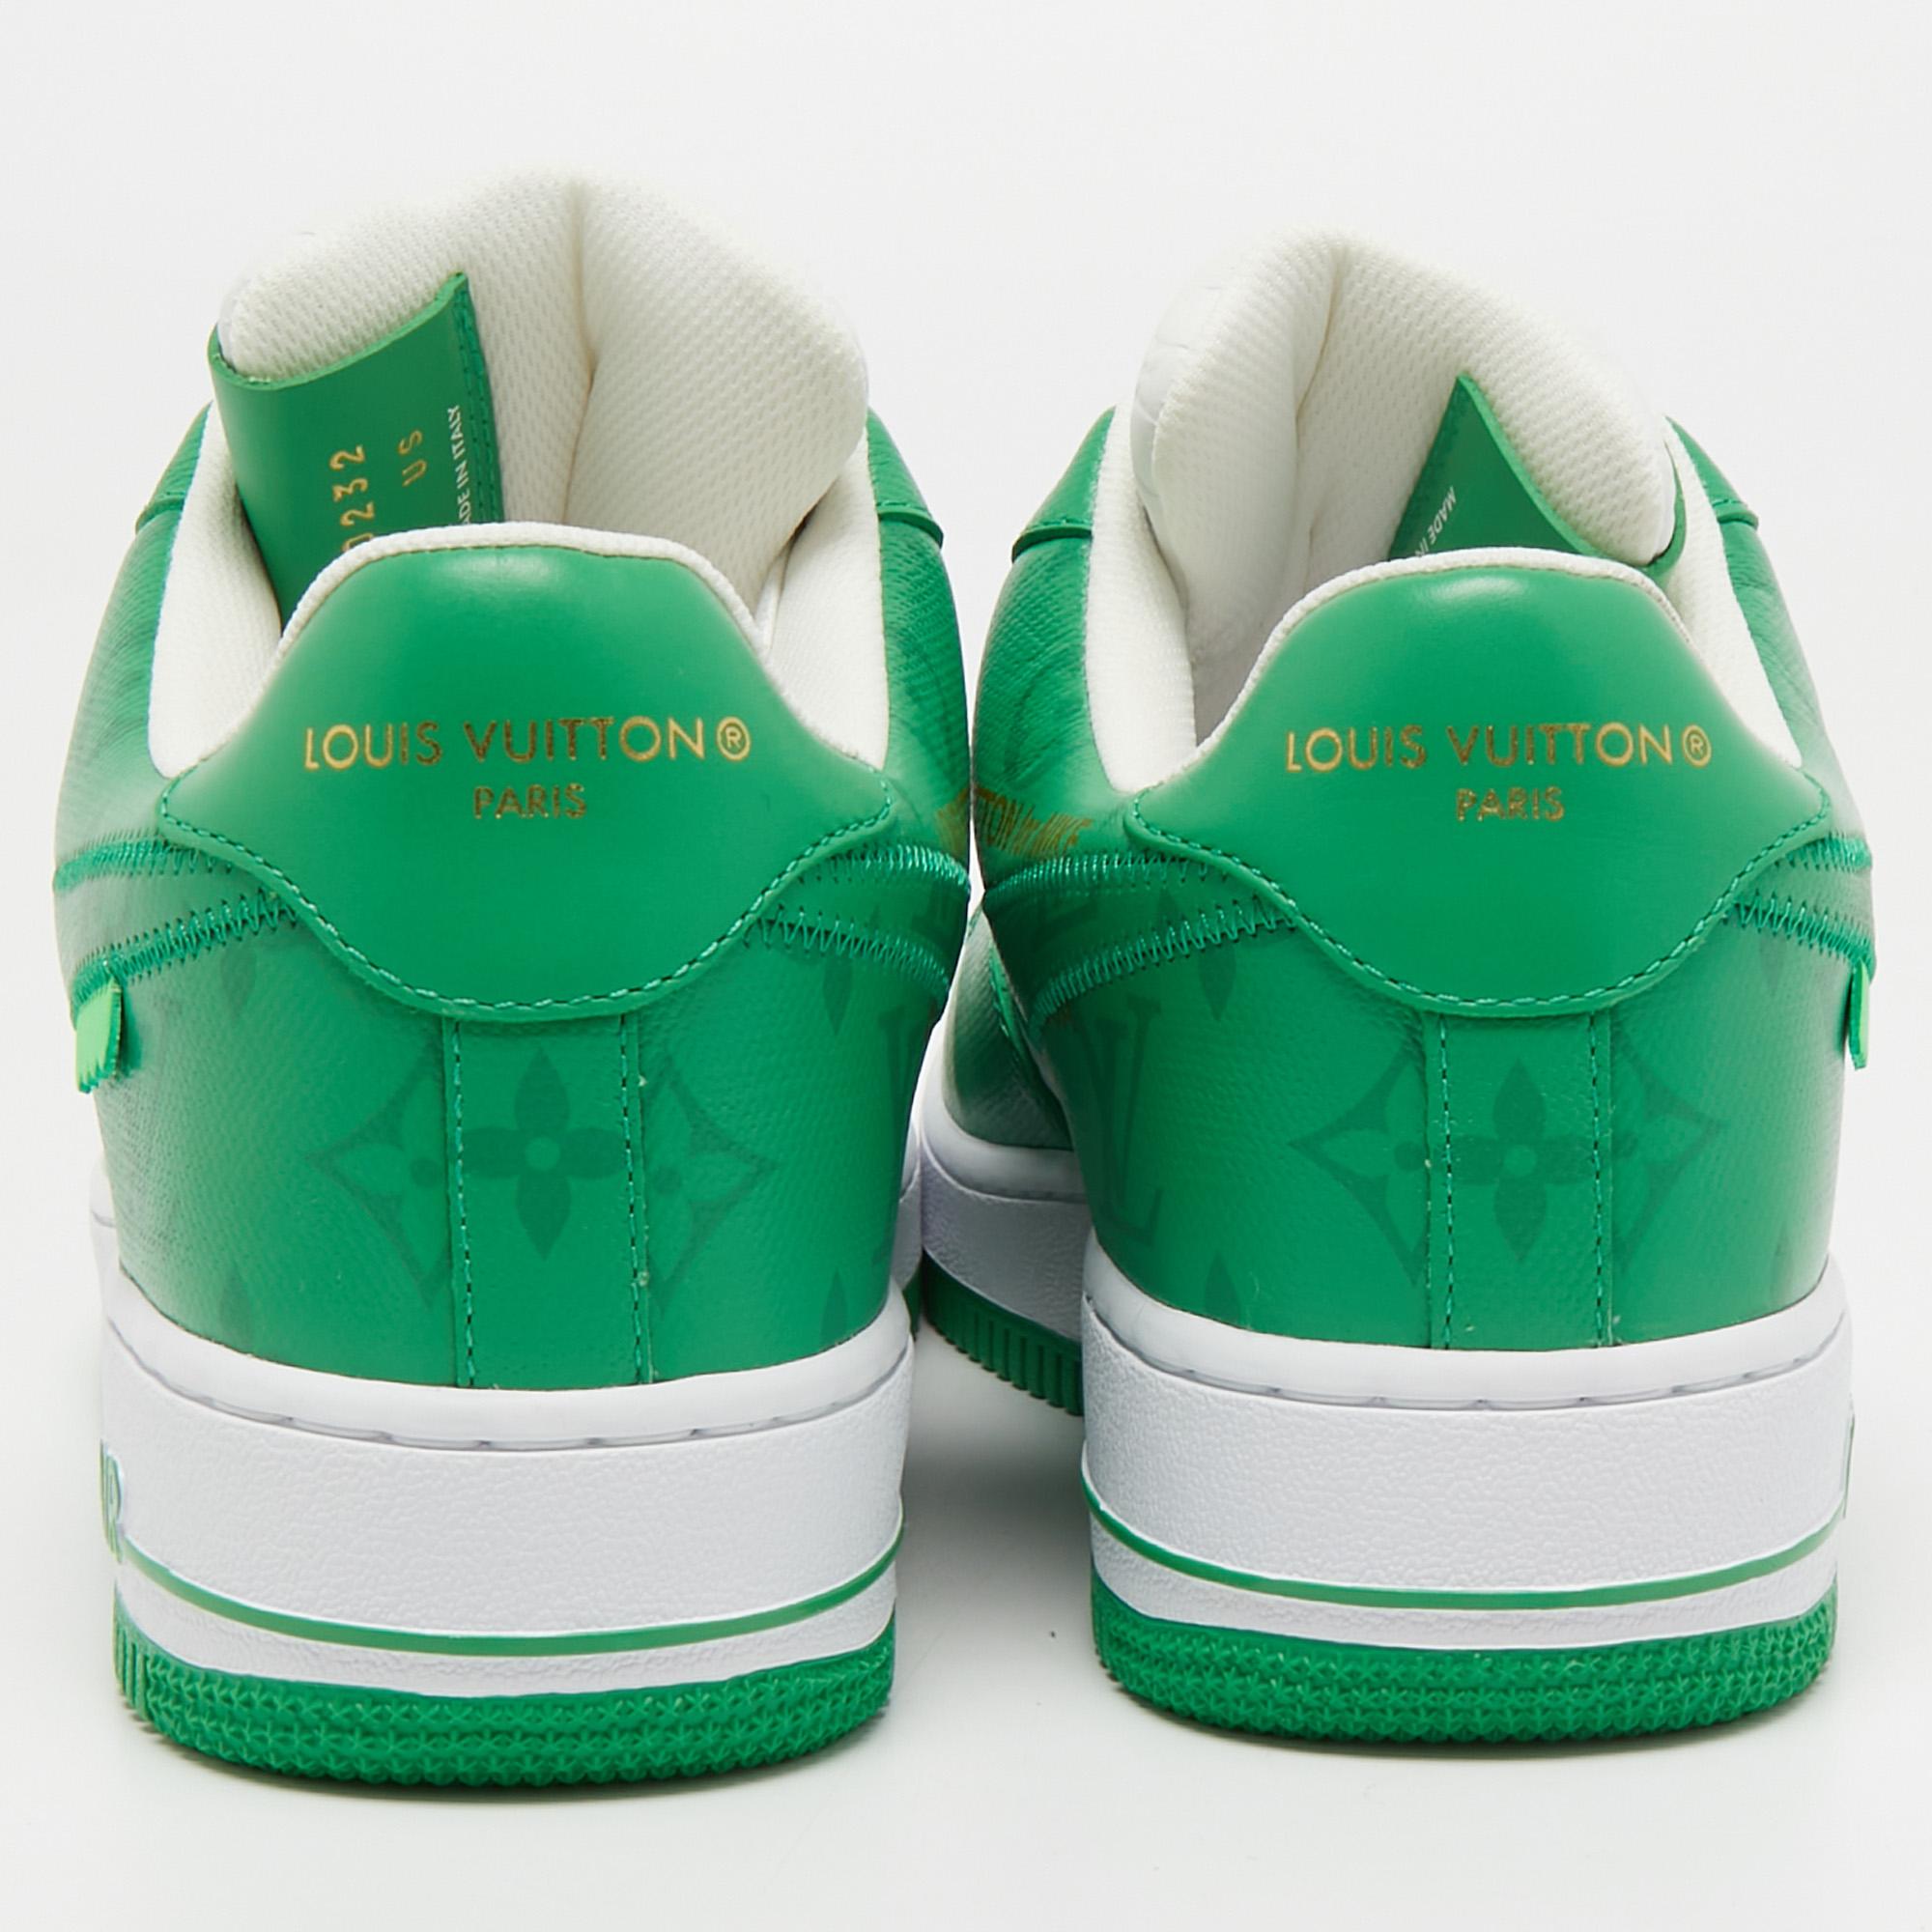 Louis Vuitton x Nike Air Force 1 Low Green Leather Sneakers Size 41 1